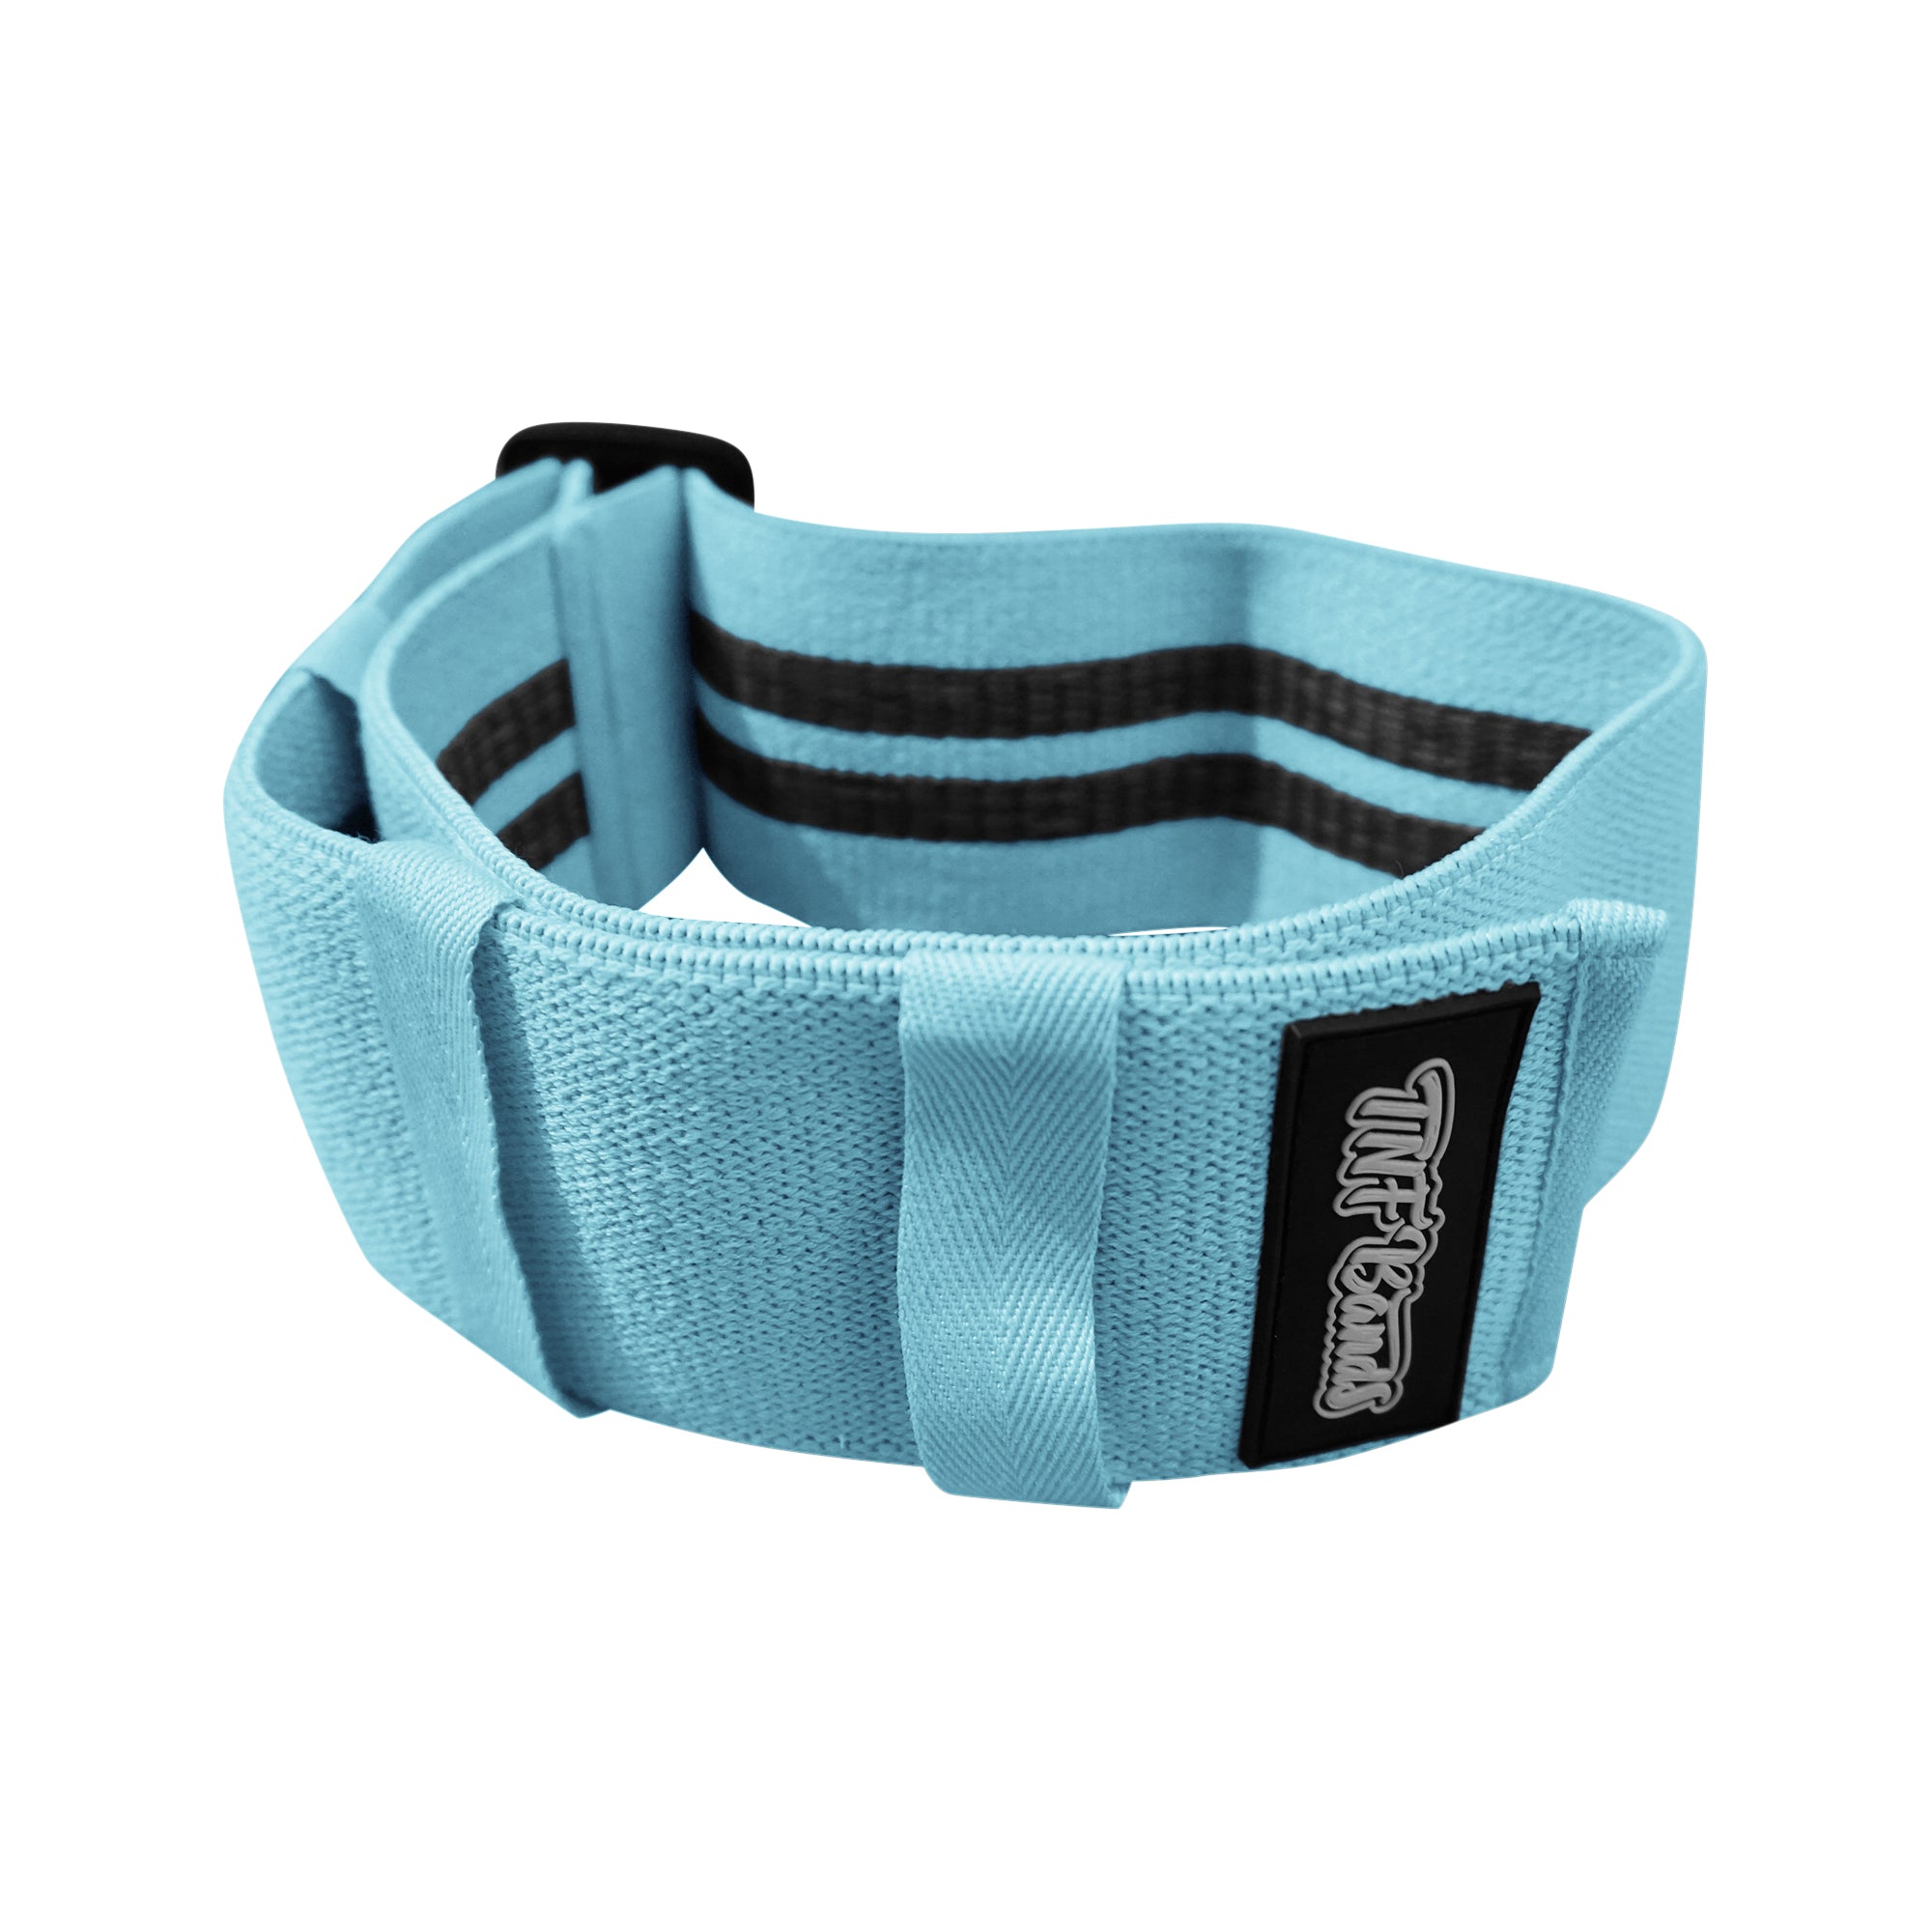 TNF Bands Adjustable Resistance Band (1 band) tnf-bands-adjustable-resistance-band-1-band Fitness Accessories Blue TNF Bands